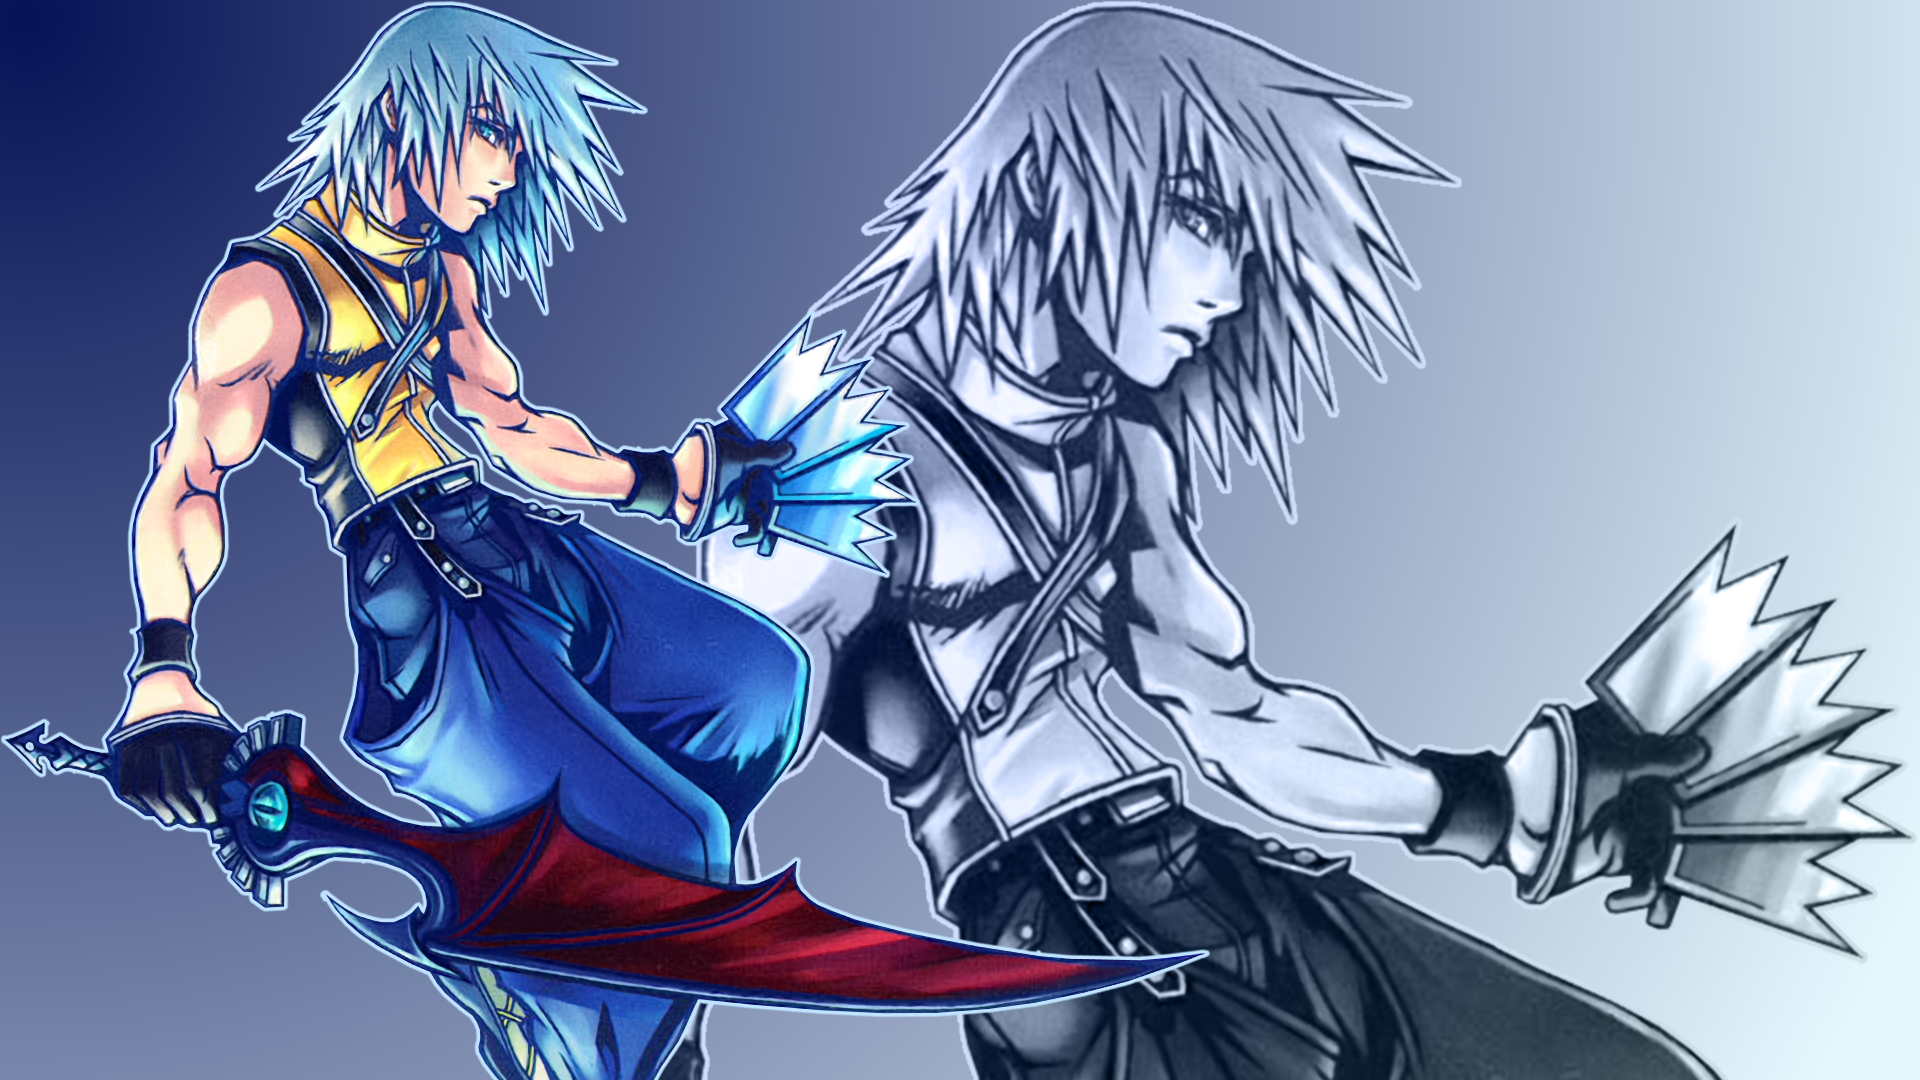 Video Game Kingdom Hearts Re:Chain of Memories HD Wallpaper | Background Image